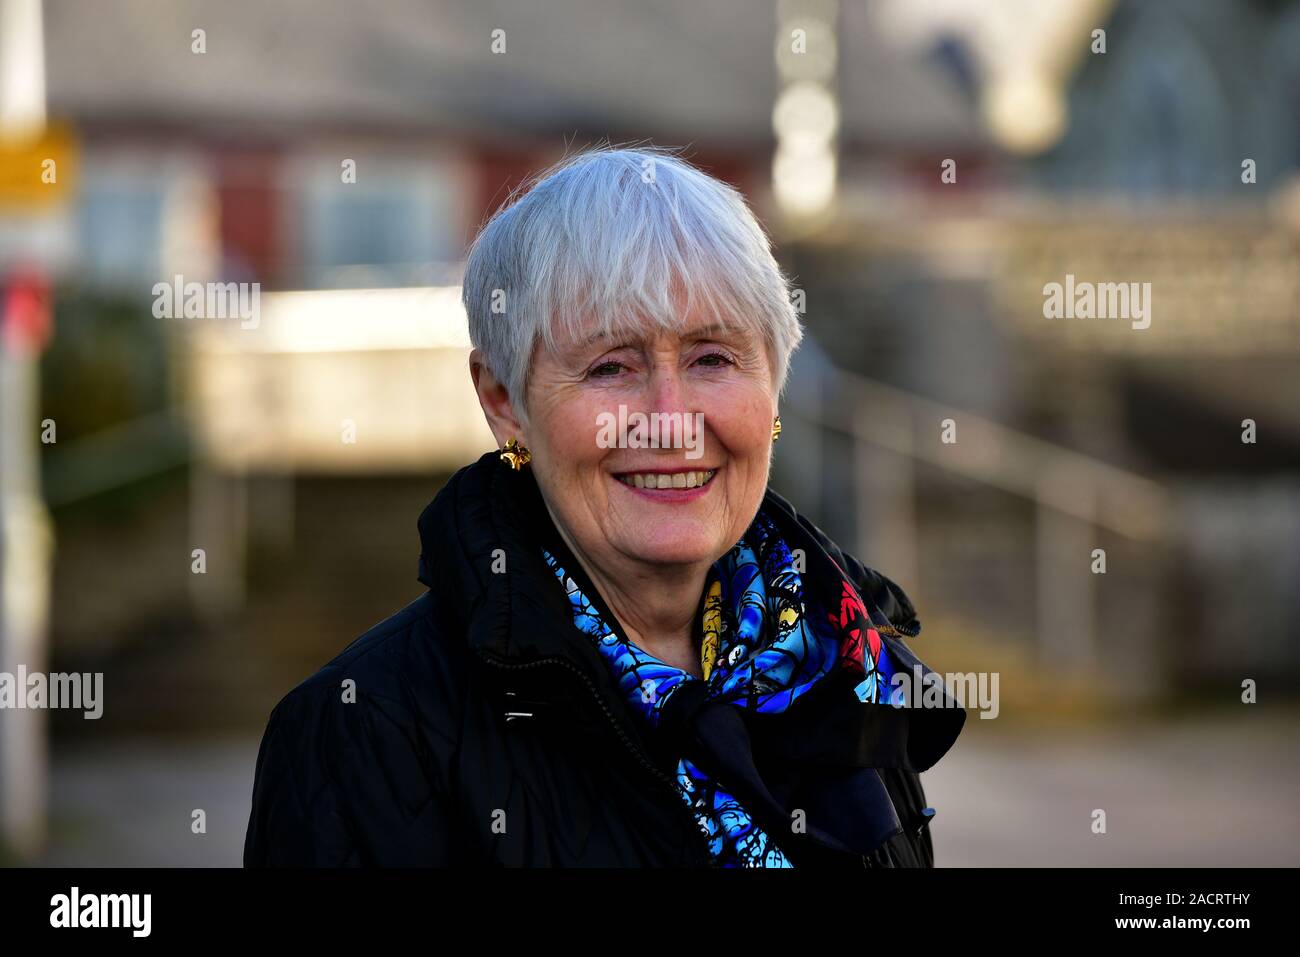 United Kingdom General Election Thursday 12th December 2019. Madeleine Moon Labour candidate for Bridgend, South Wales. Picture taken November 2019. Stock Photo